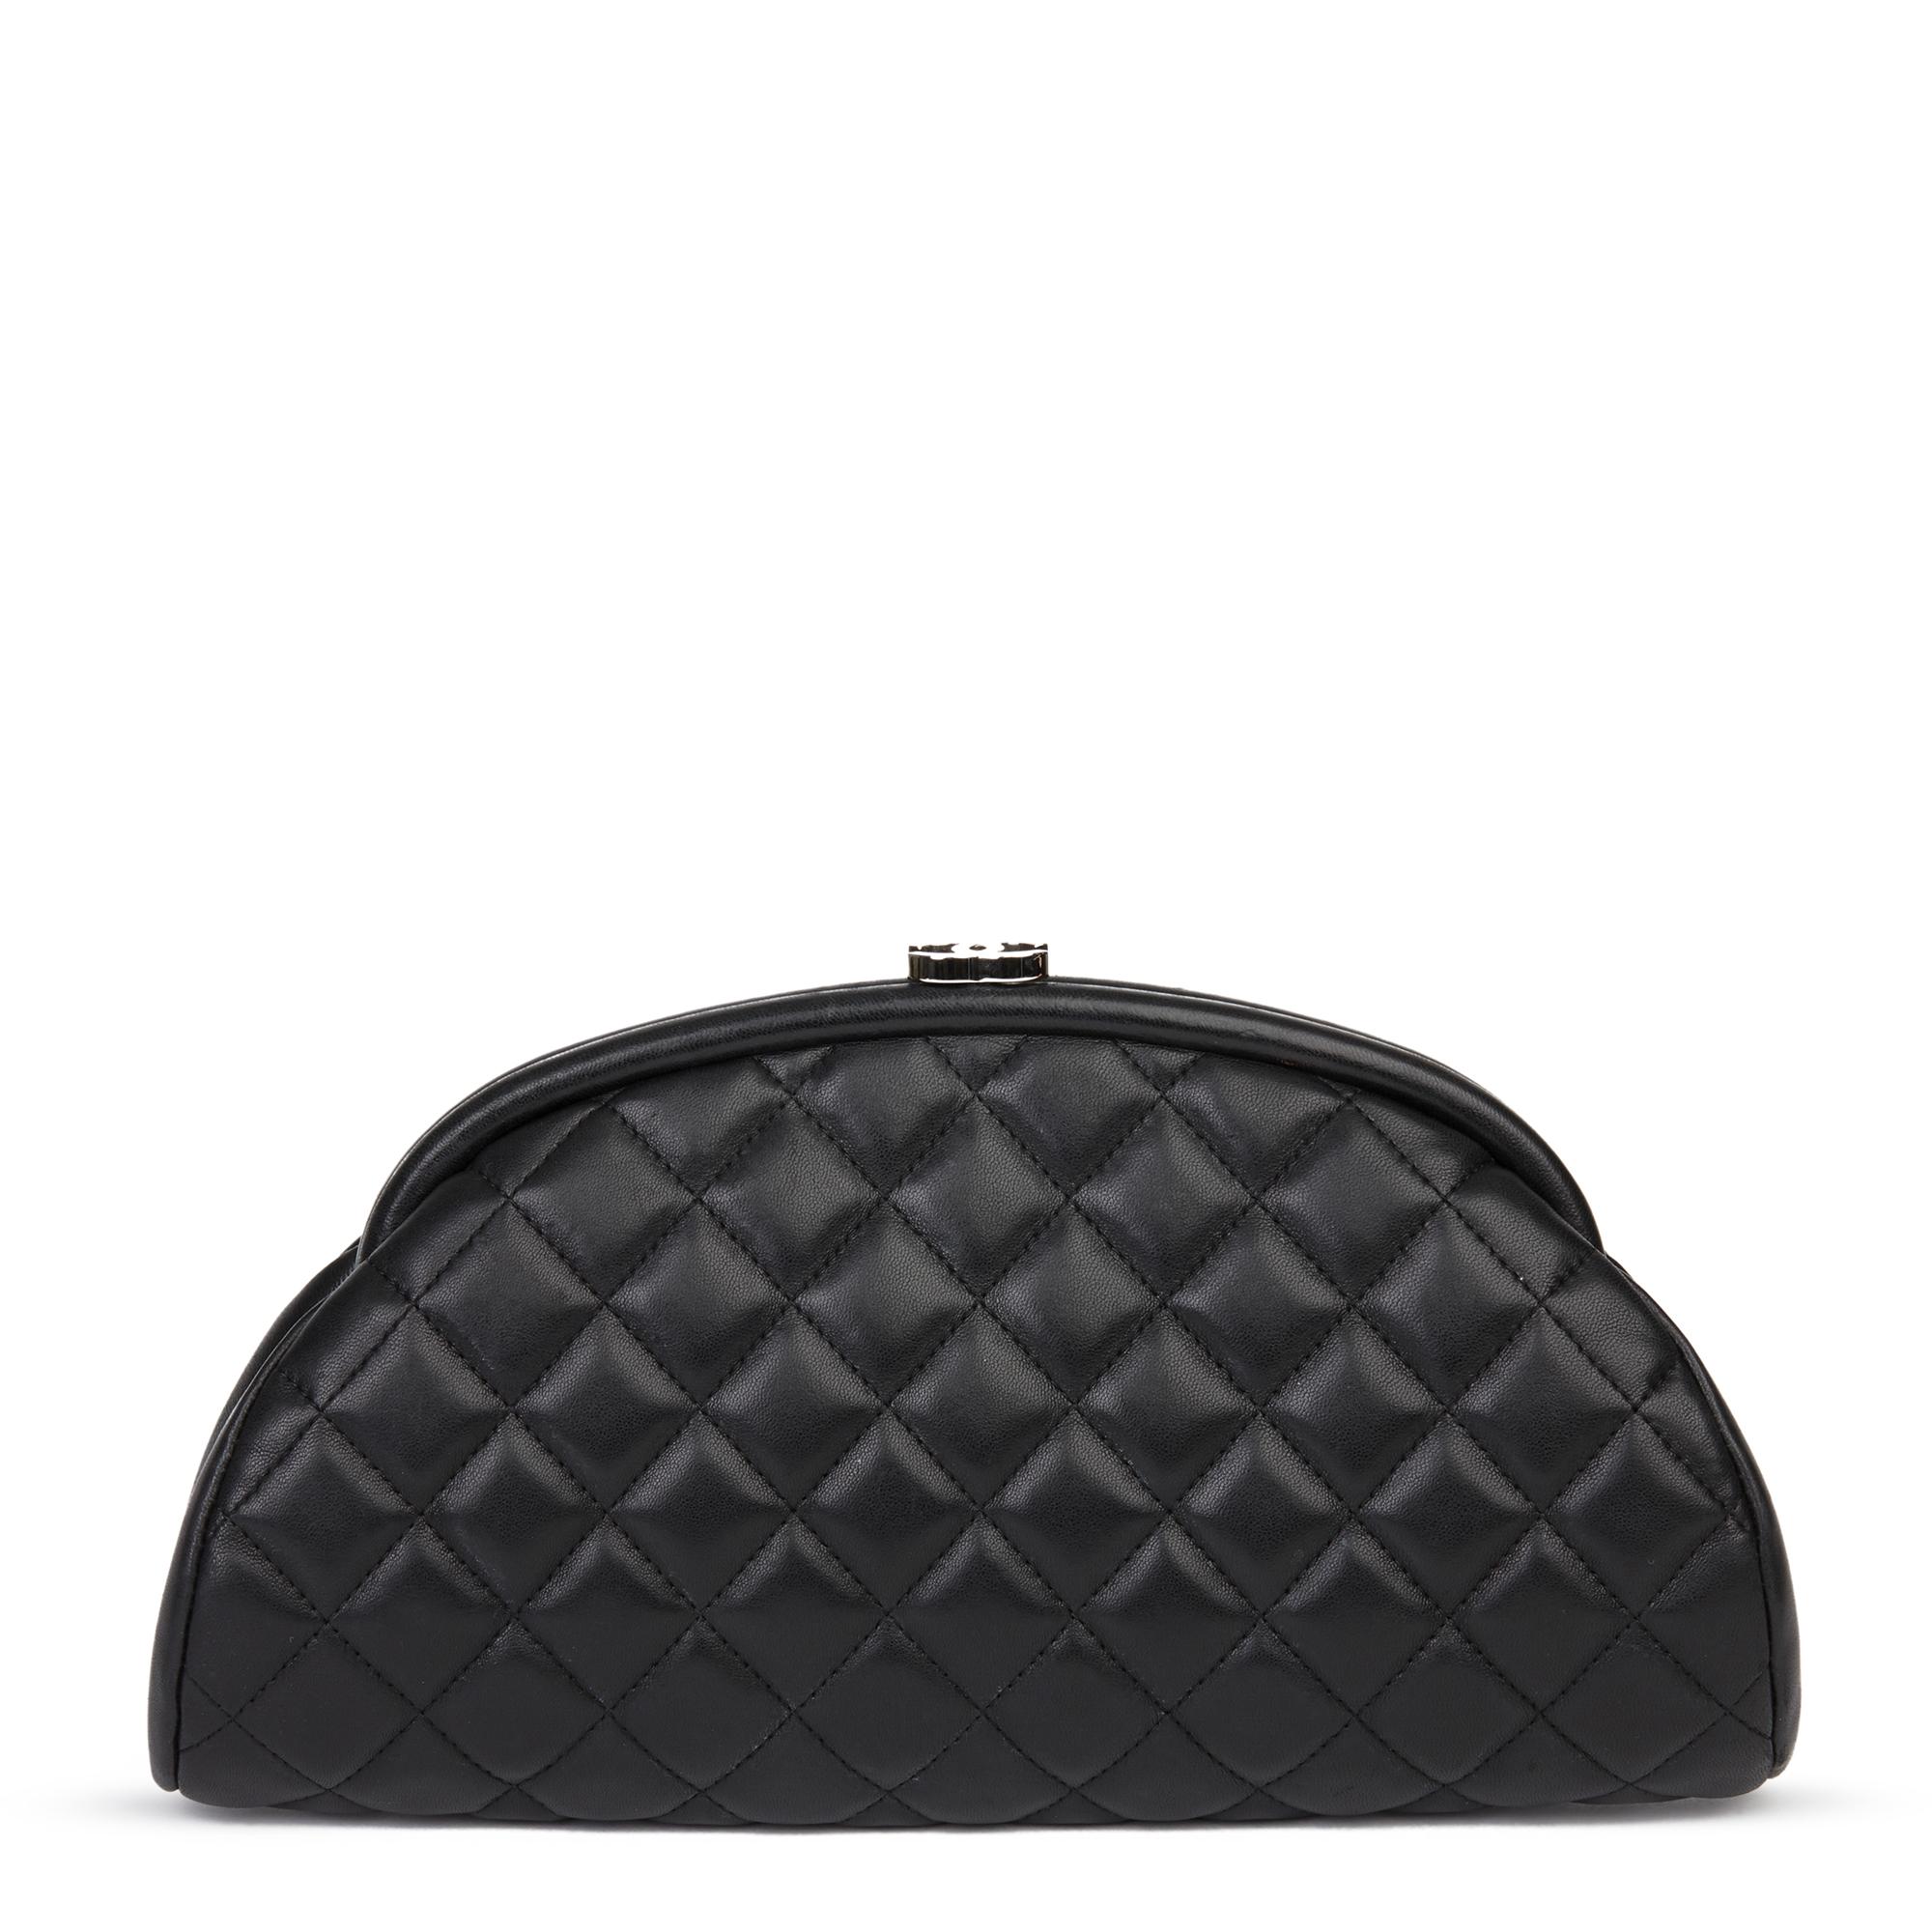 Women's 2011 Chanel Black Quilted Lambskin Timeless Clutch